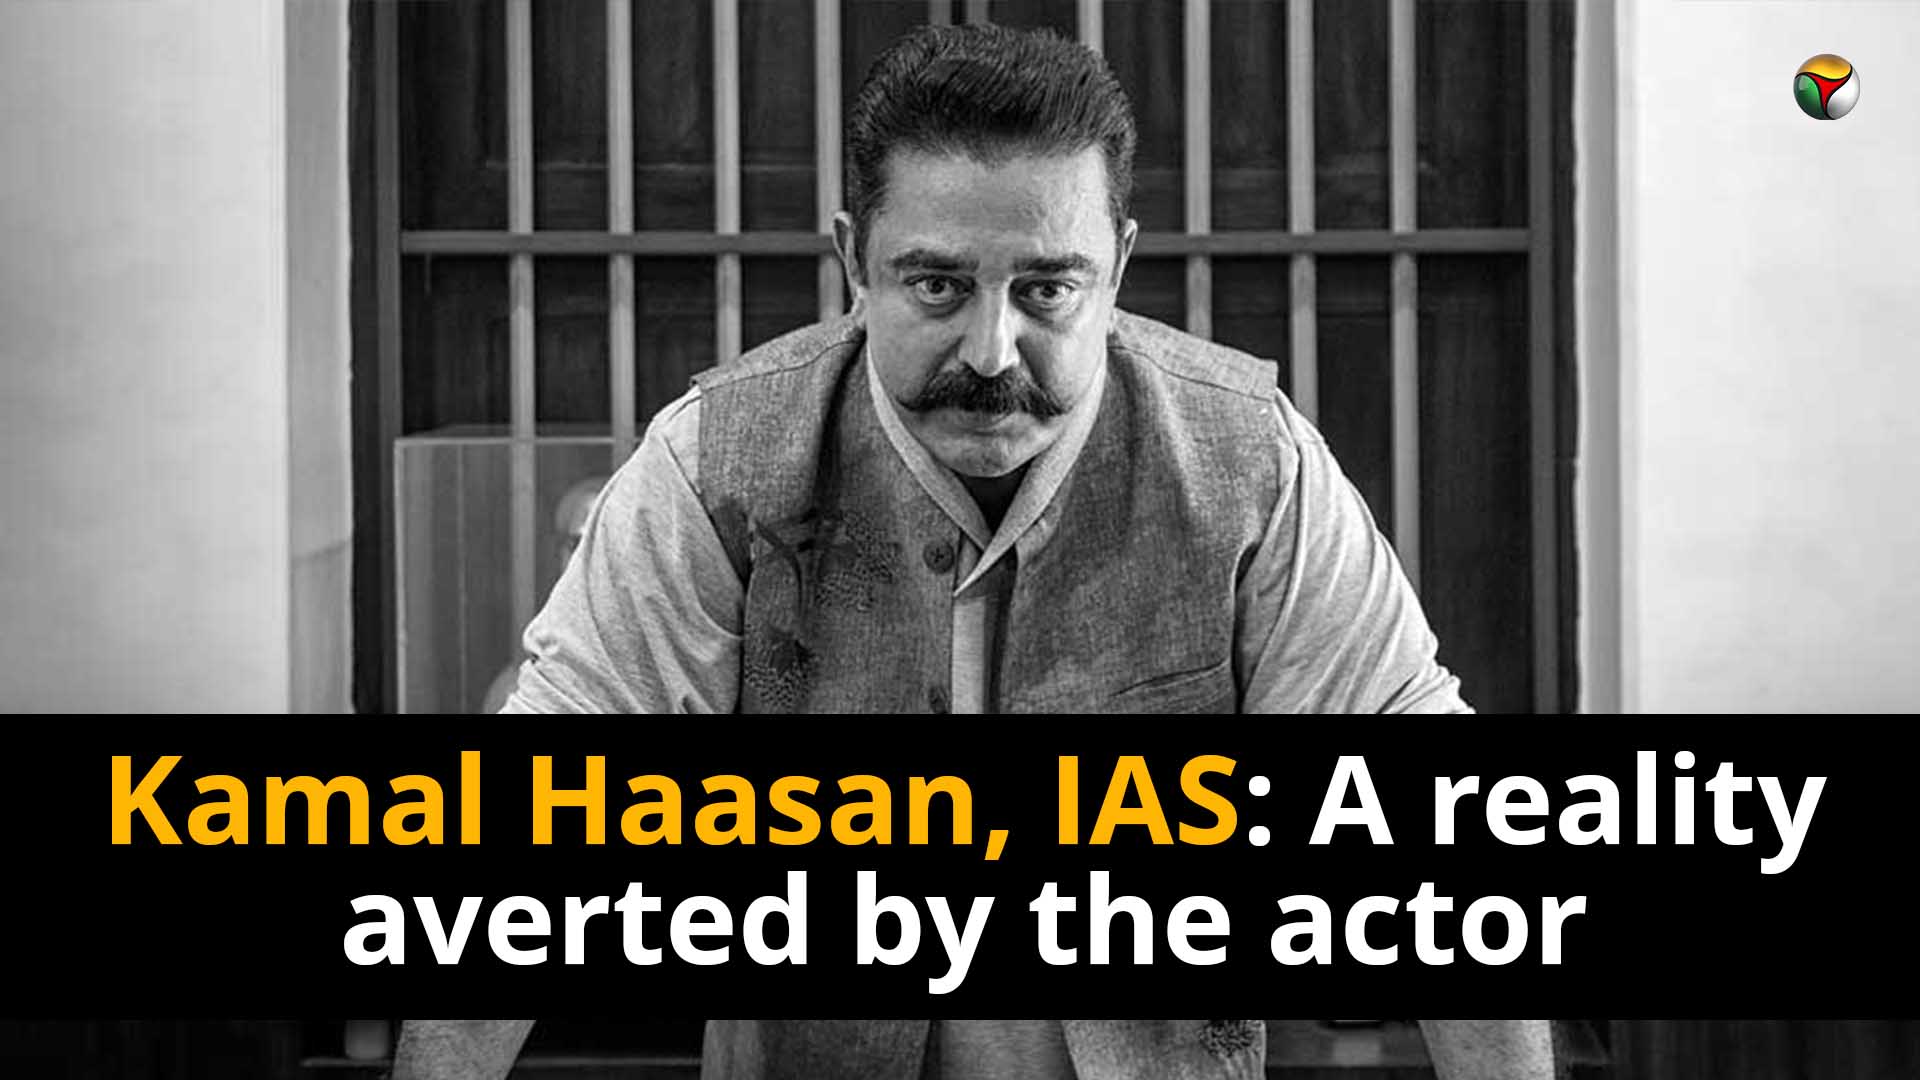 Kamal Haasan, IAS: A reality averted by the actor